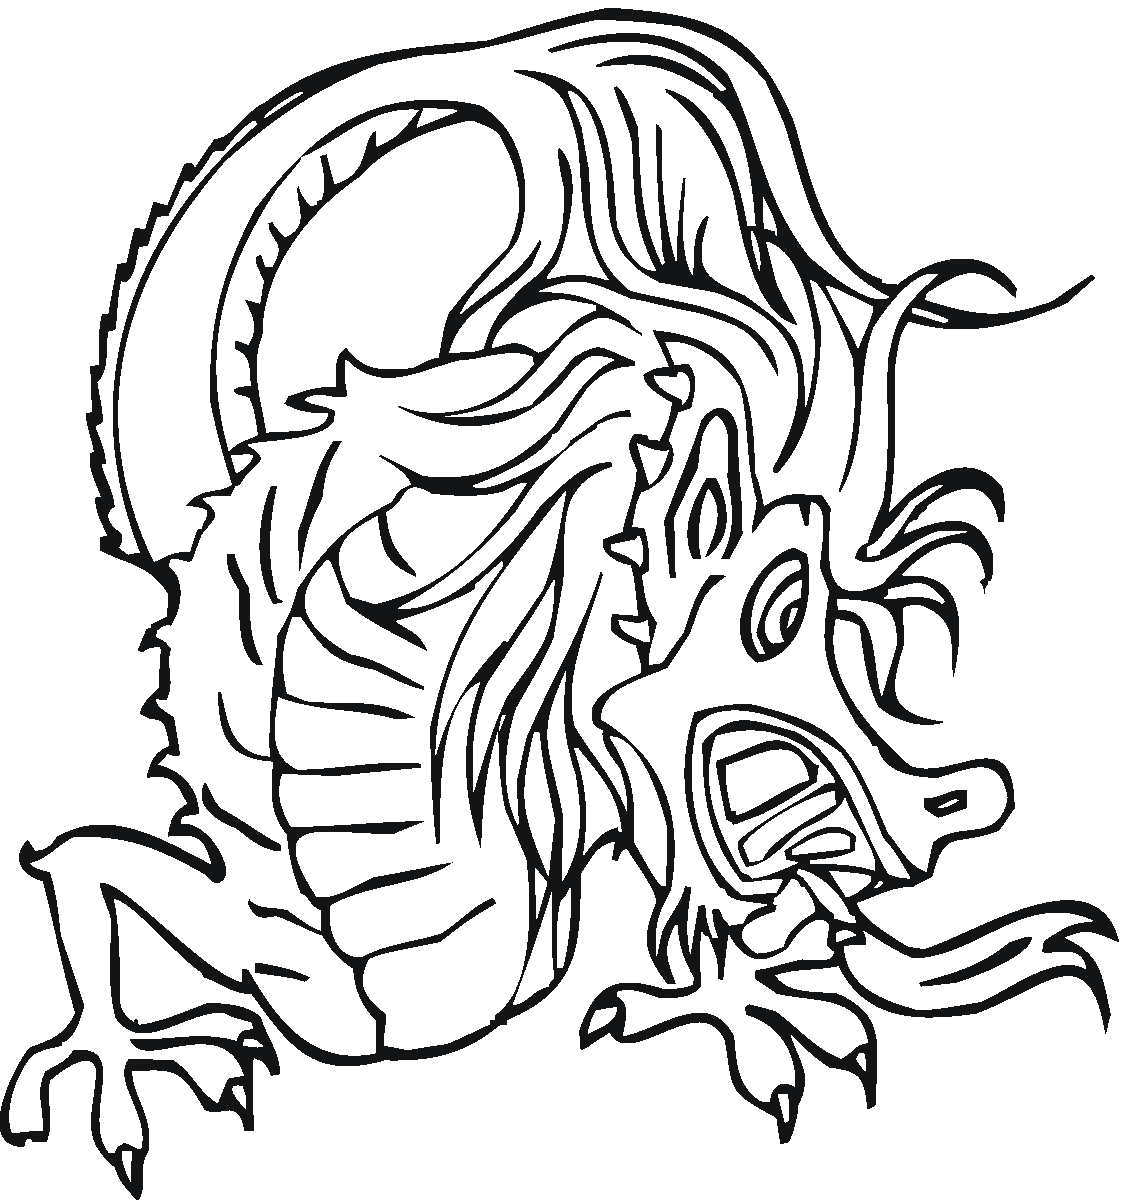 printable dragon mudwing dragon from wings of fire coloring page free dragon printable 